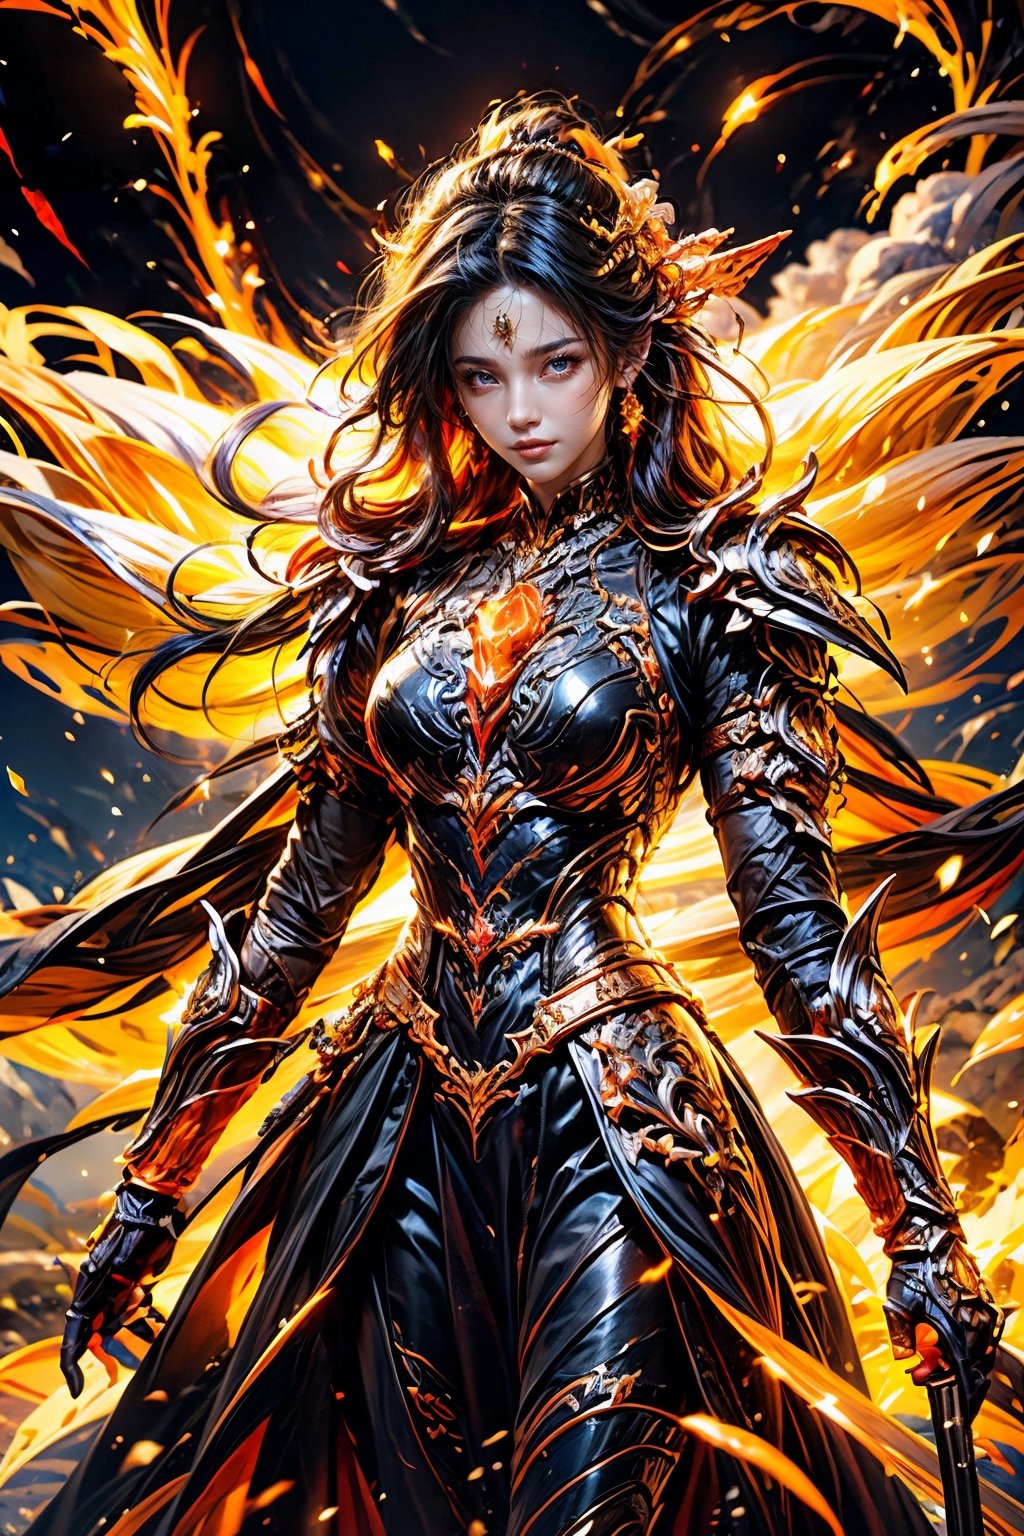 "Generates a visually stunning high-quality 4K ultra HDR image featuring a handsome, athletic young woman warrior with black hair and tanned skin. Dress him in magical space opera-style armor that shines with power, accentuating his might. ( Ensures meticulous details in the design of the armor, making it both ornate and functional). ( Place in your hand a glowing, shiny, smooth sword that emanates a dangerous glow). Create a perfect, super-realistic scene that combines photographic excellence, photorealism and fantasy aesthetics. The image must encapsulate the essence of an anti-hero in a mythical world, where every detail, from the warrior's expression to the magical elements, contributes to a visually captivating and immersive experience.",mecha musume , fullbody,huoshen